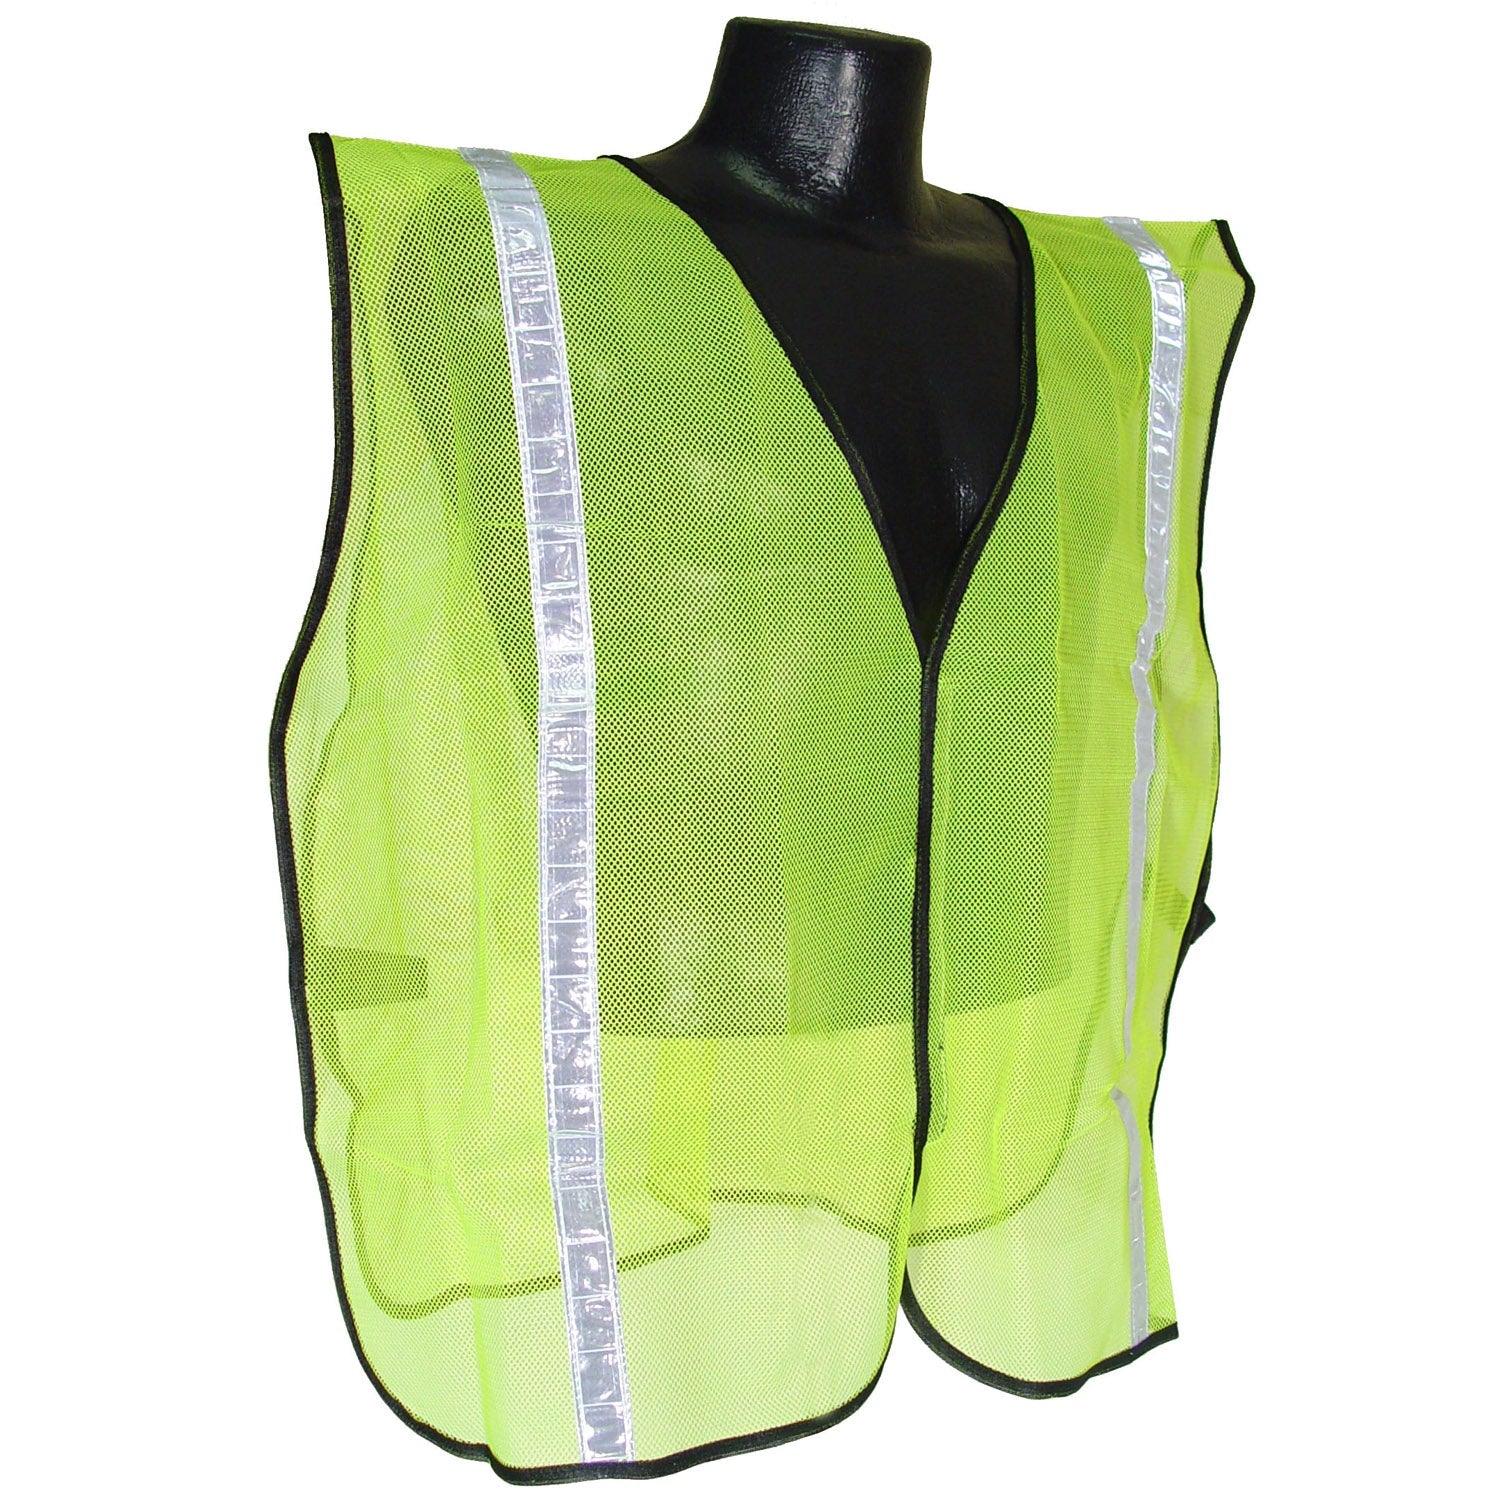 Radians Non Rated Mesh Safety Vest with 1" Tape